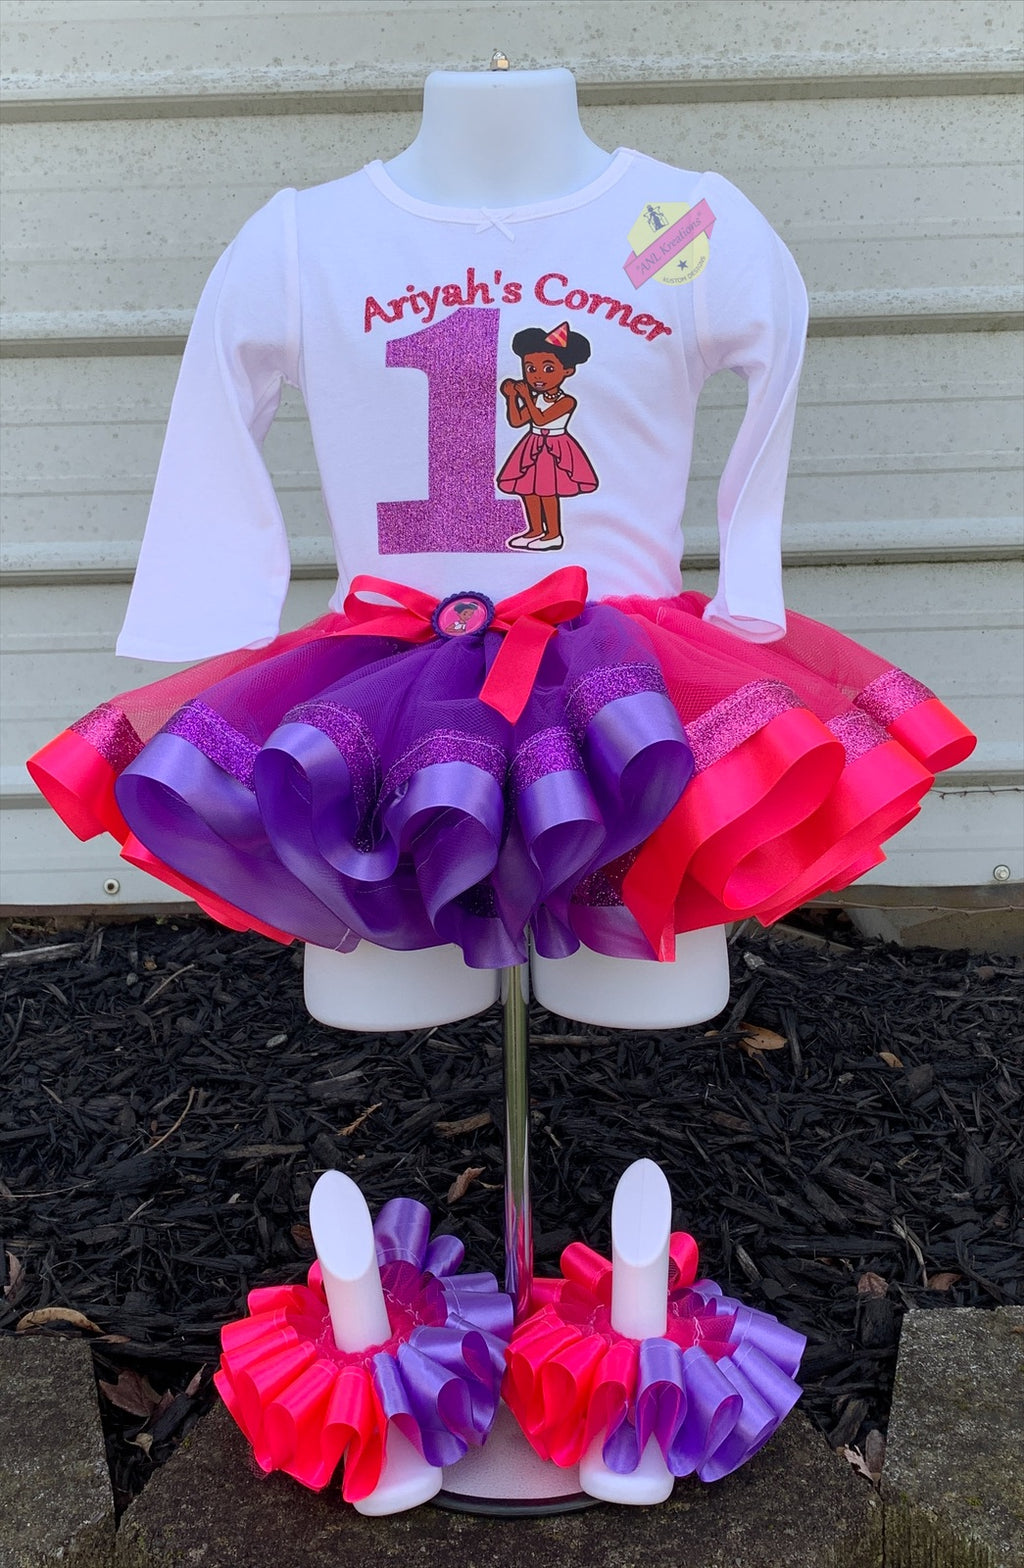 Gracie’s Corner Birthday Shirt, Gracie’s B-day Outfit. Optional matching hairbows, ruffle socks and Tu-Tu and Shoes. Other numbers available..